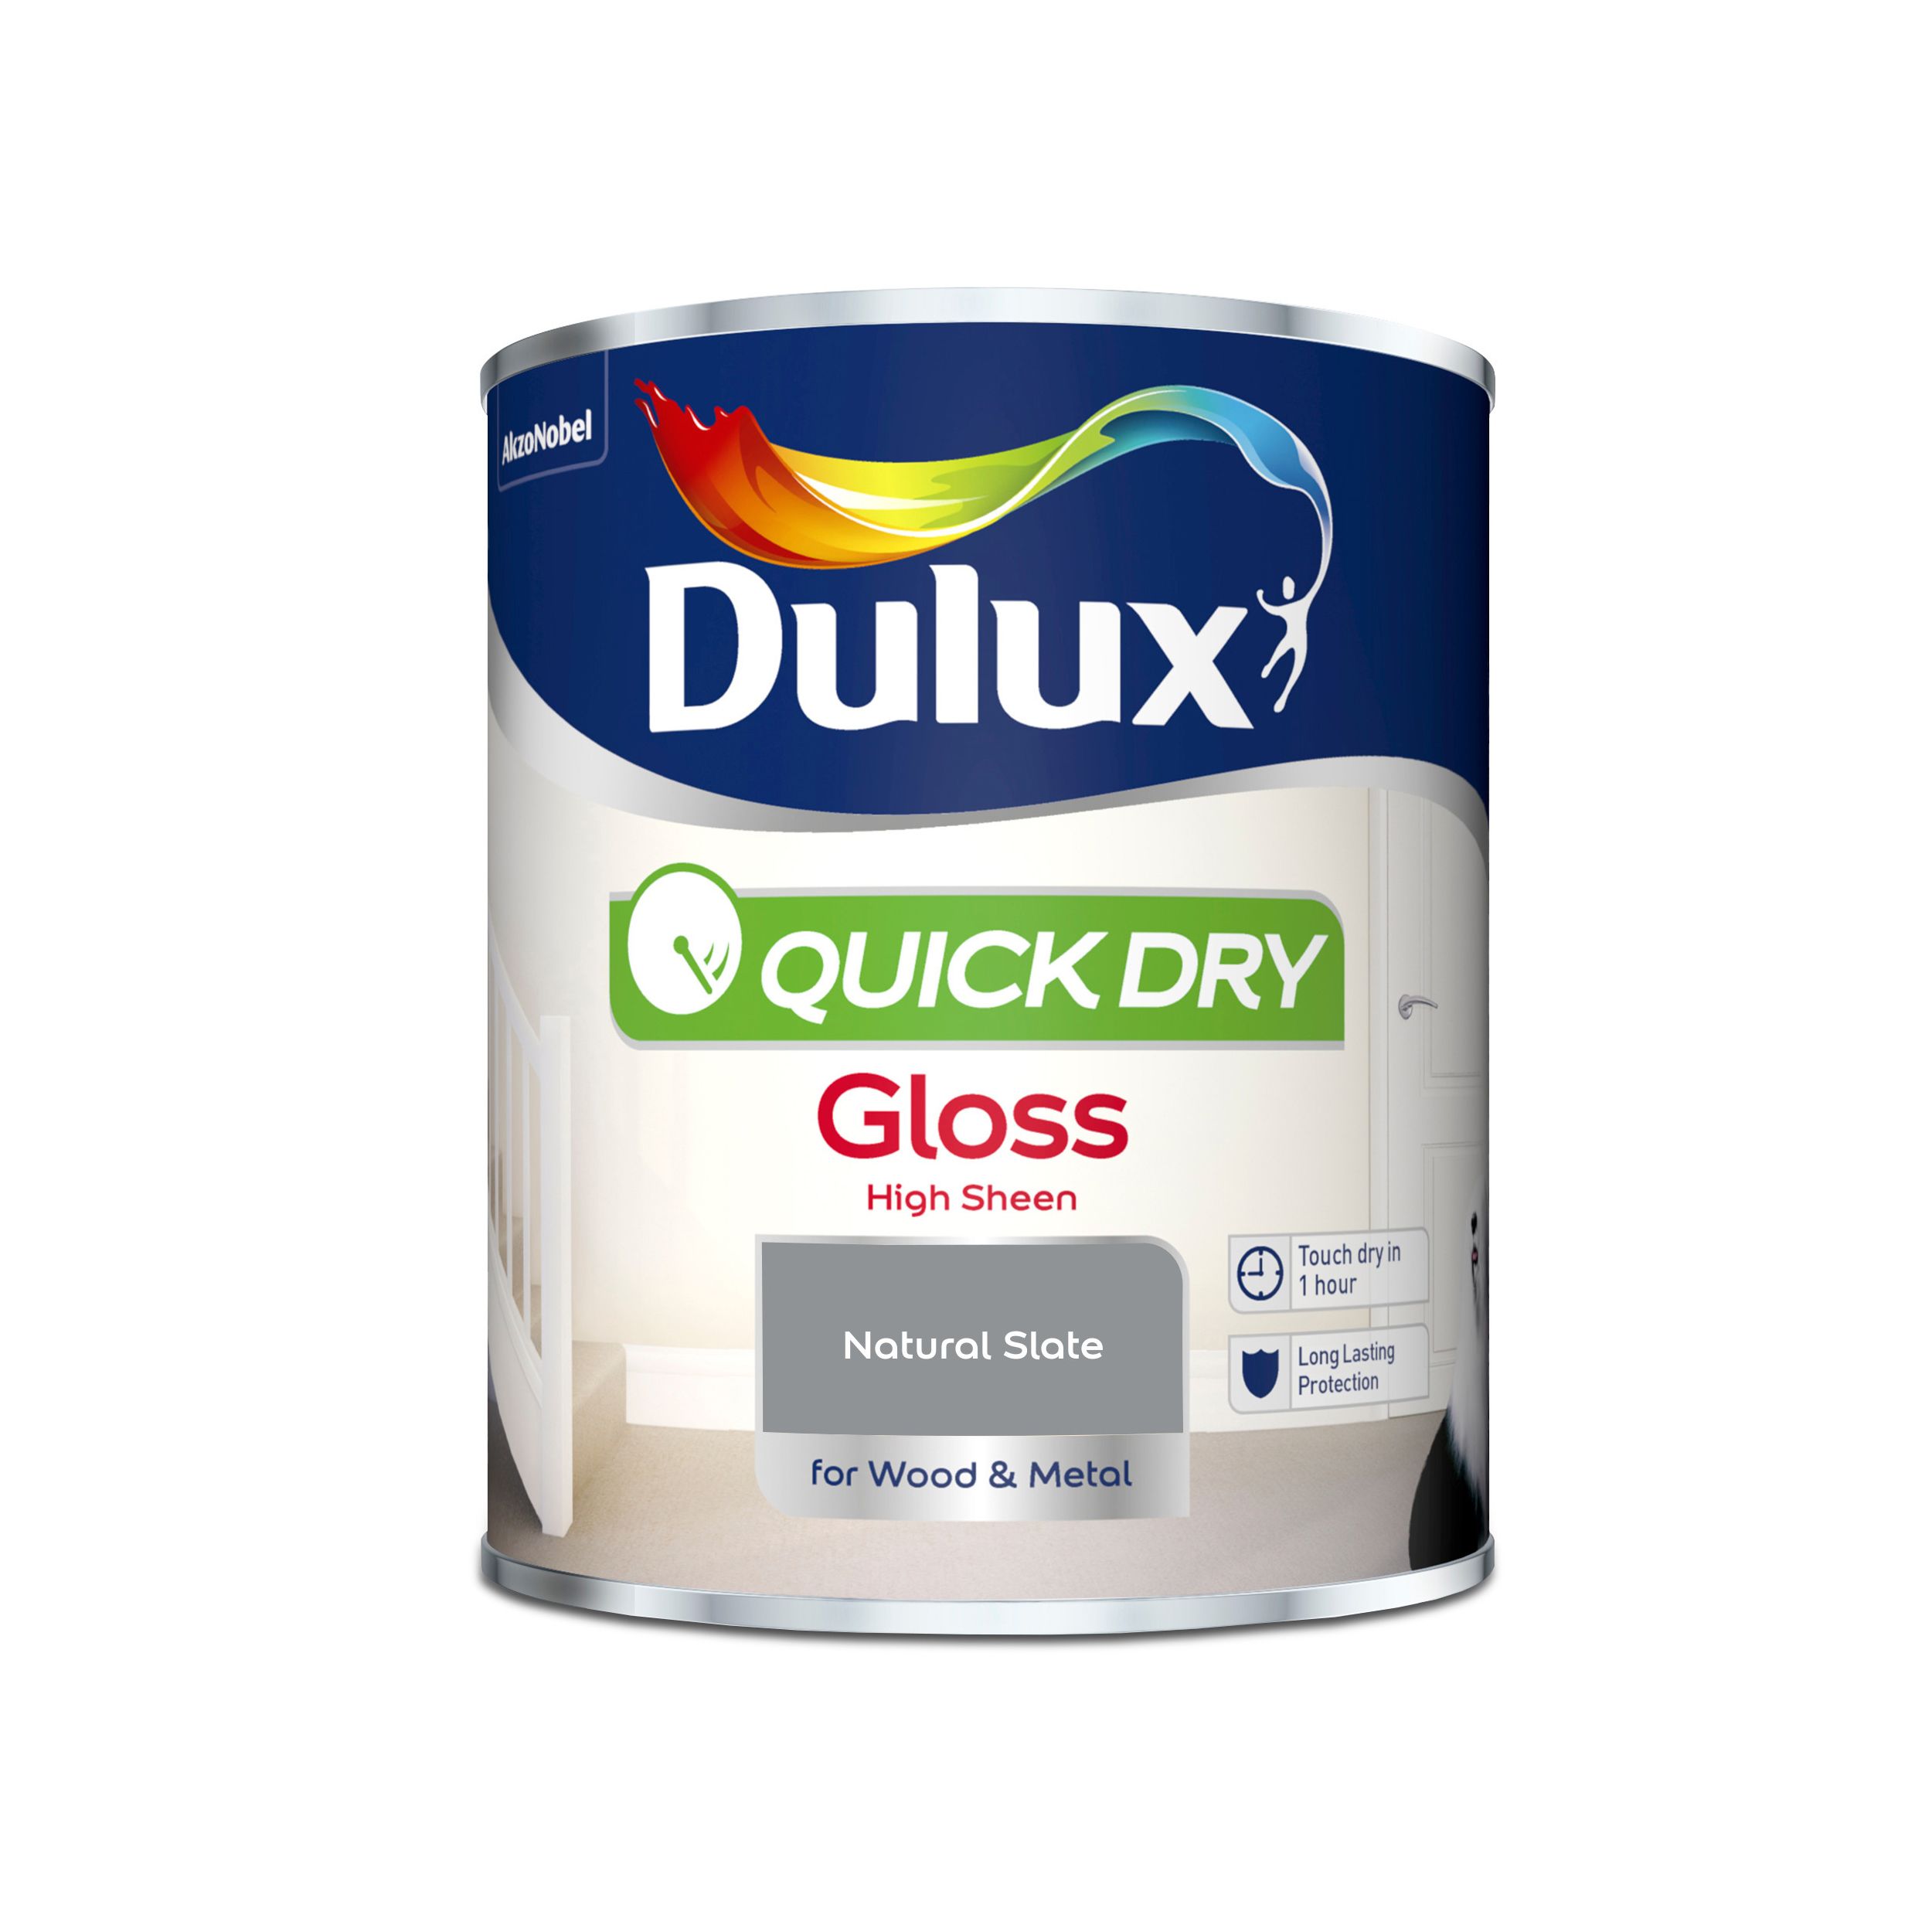 Dulux Quick dry Natural slate Gloss Metal & wood paint, 750ml